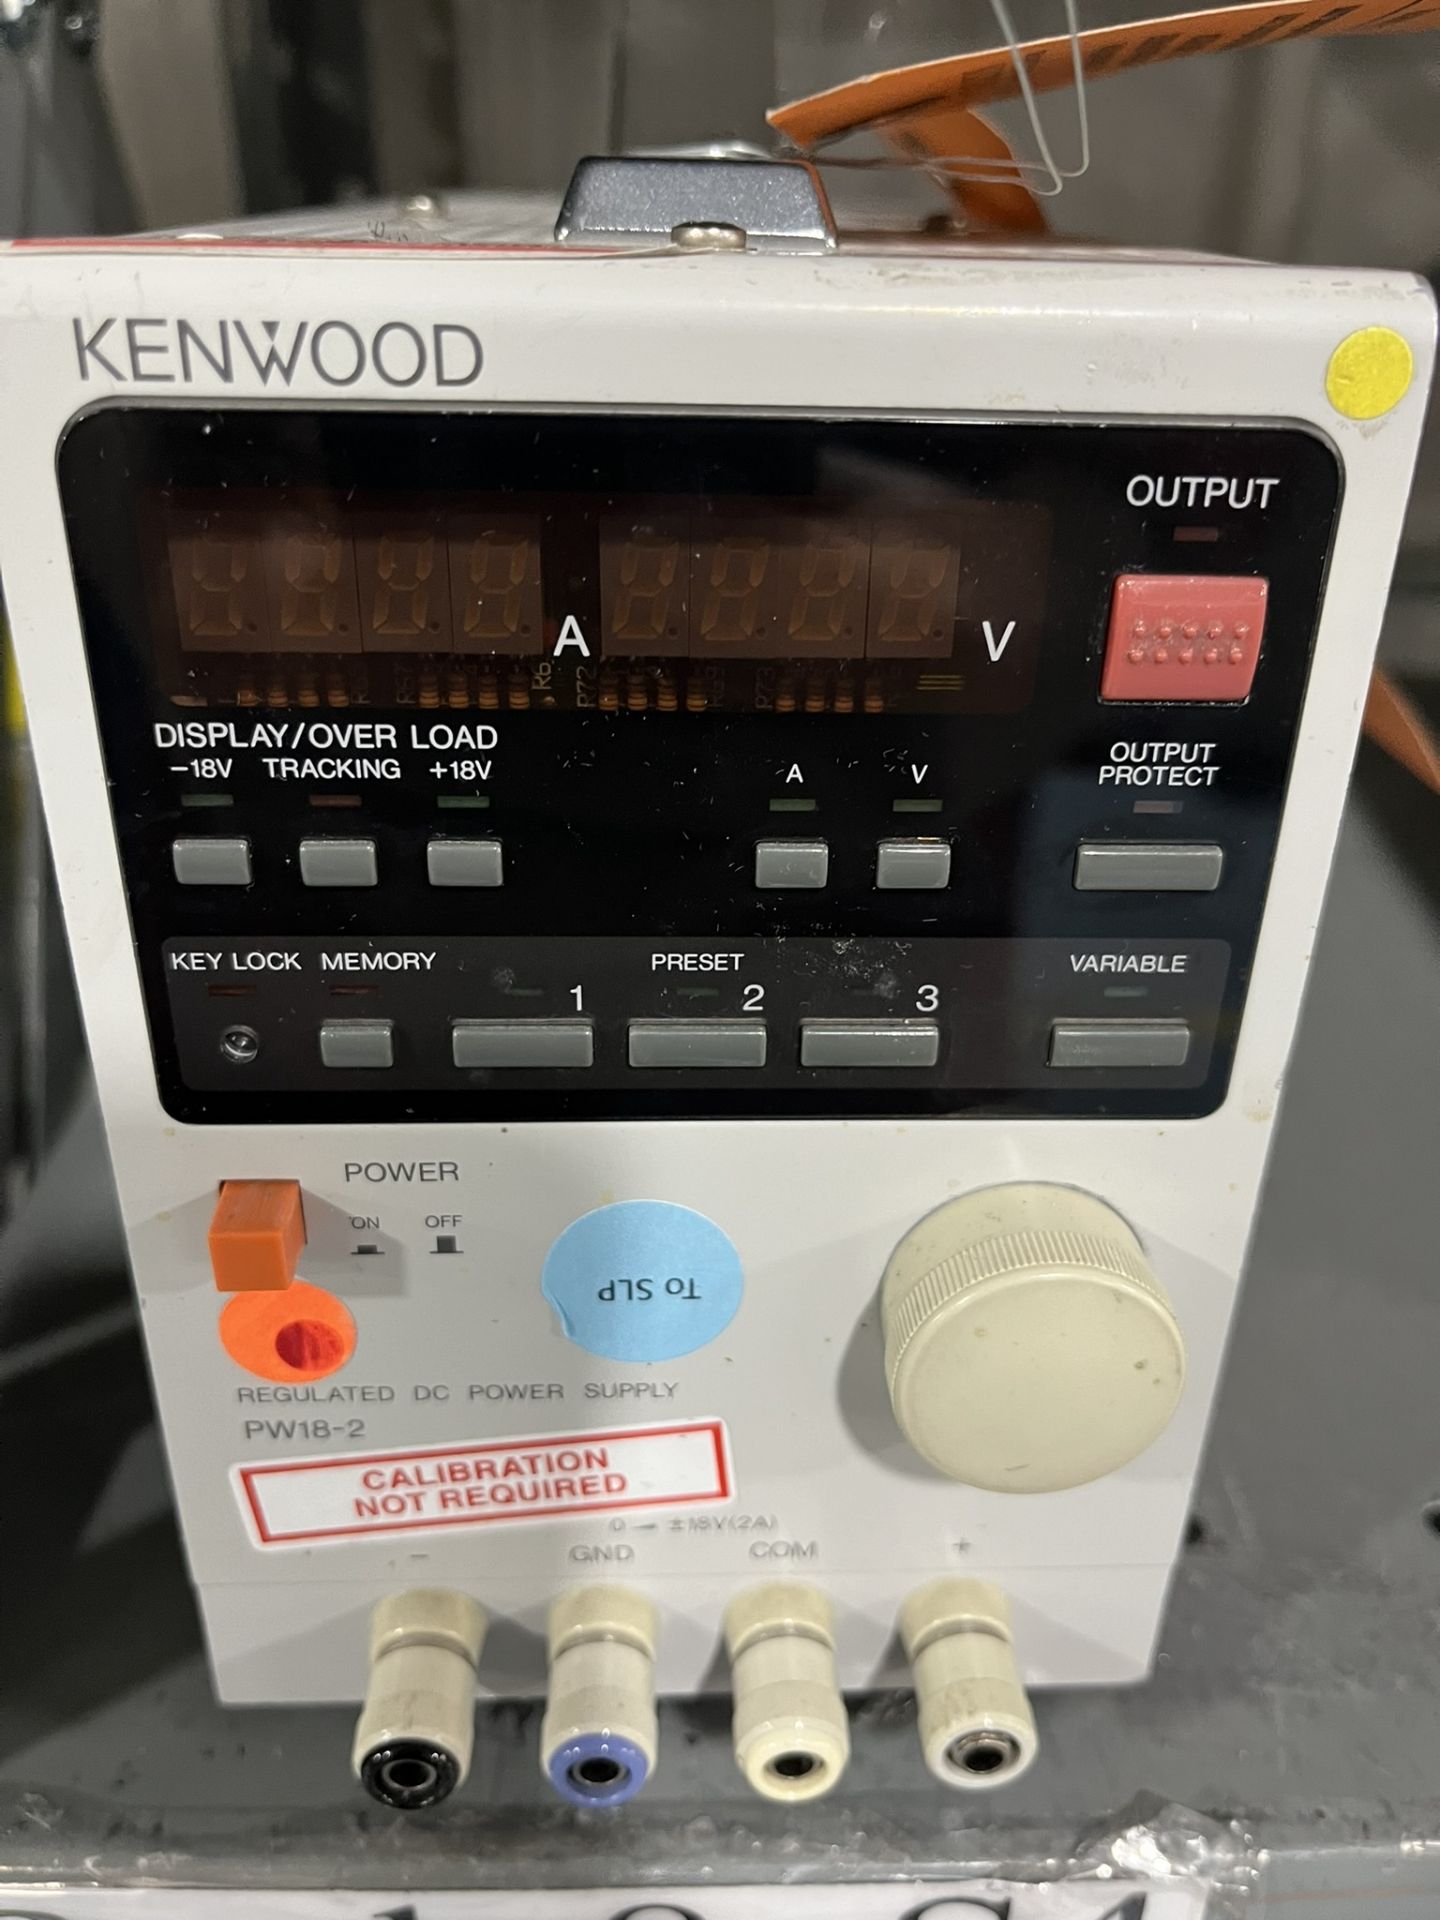 KENWOOD PW18-2 REGULATED DC POWER SUPPLY (ZONES A&B1)